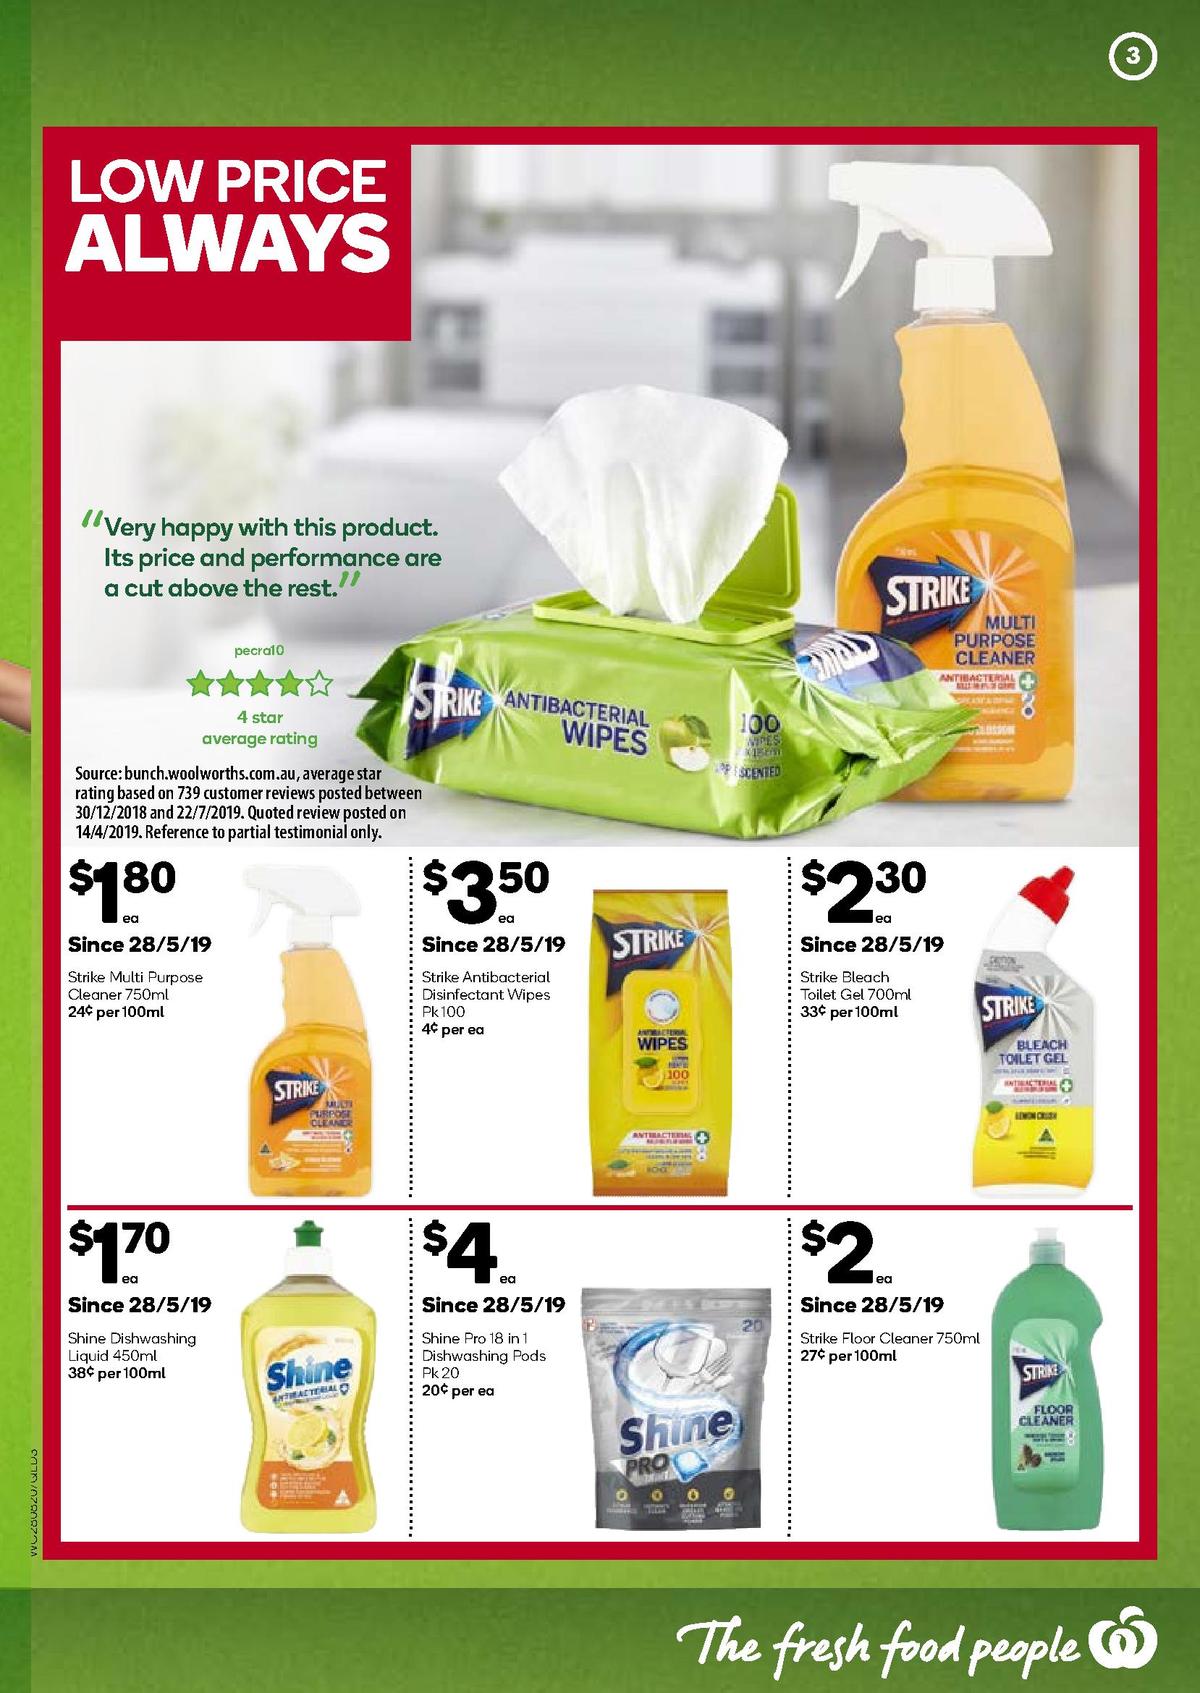 Woolworths Catalogues from 28 August